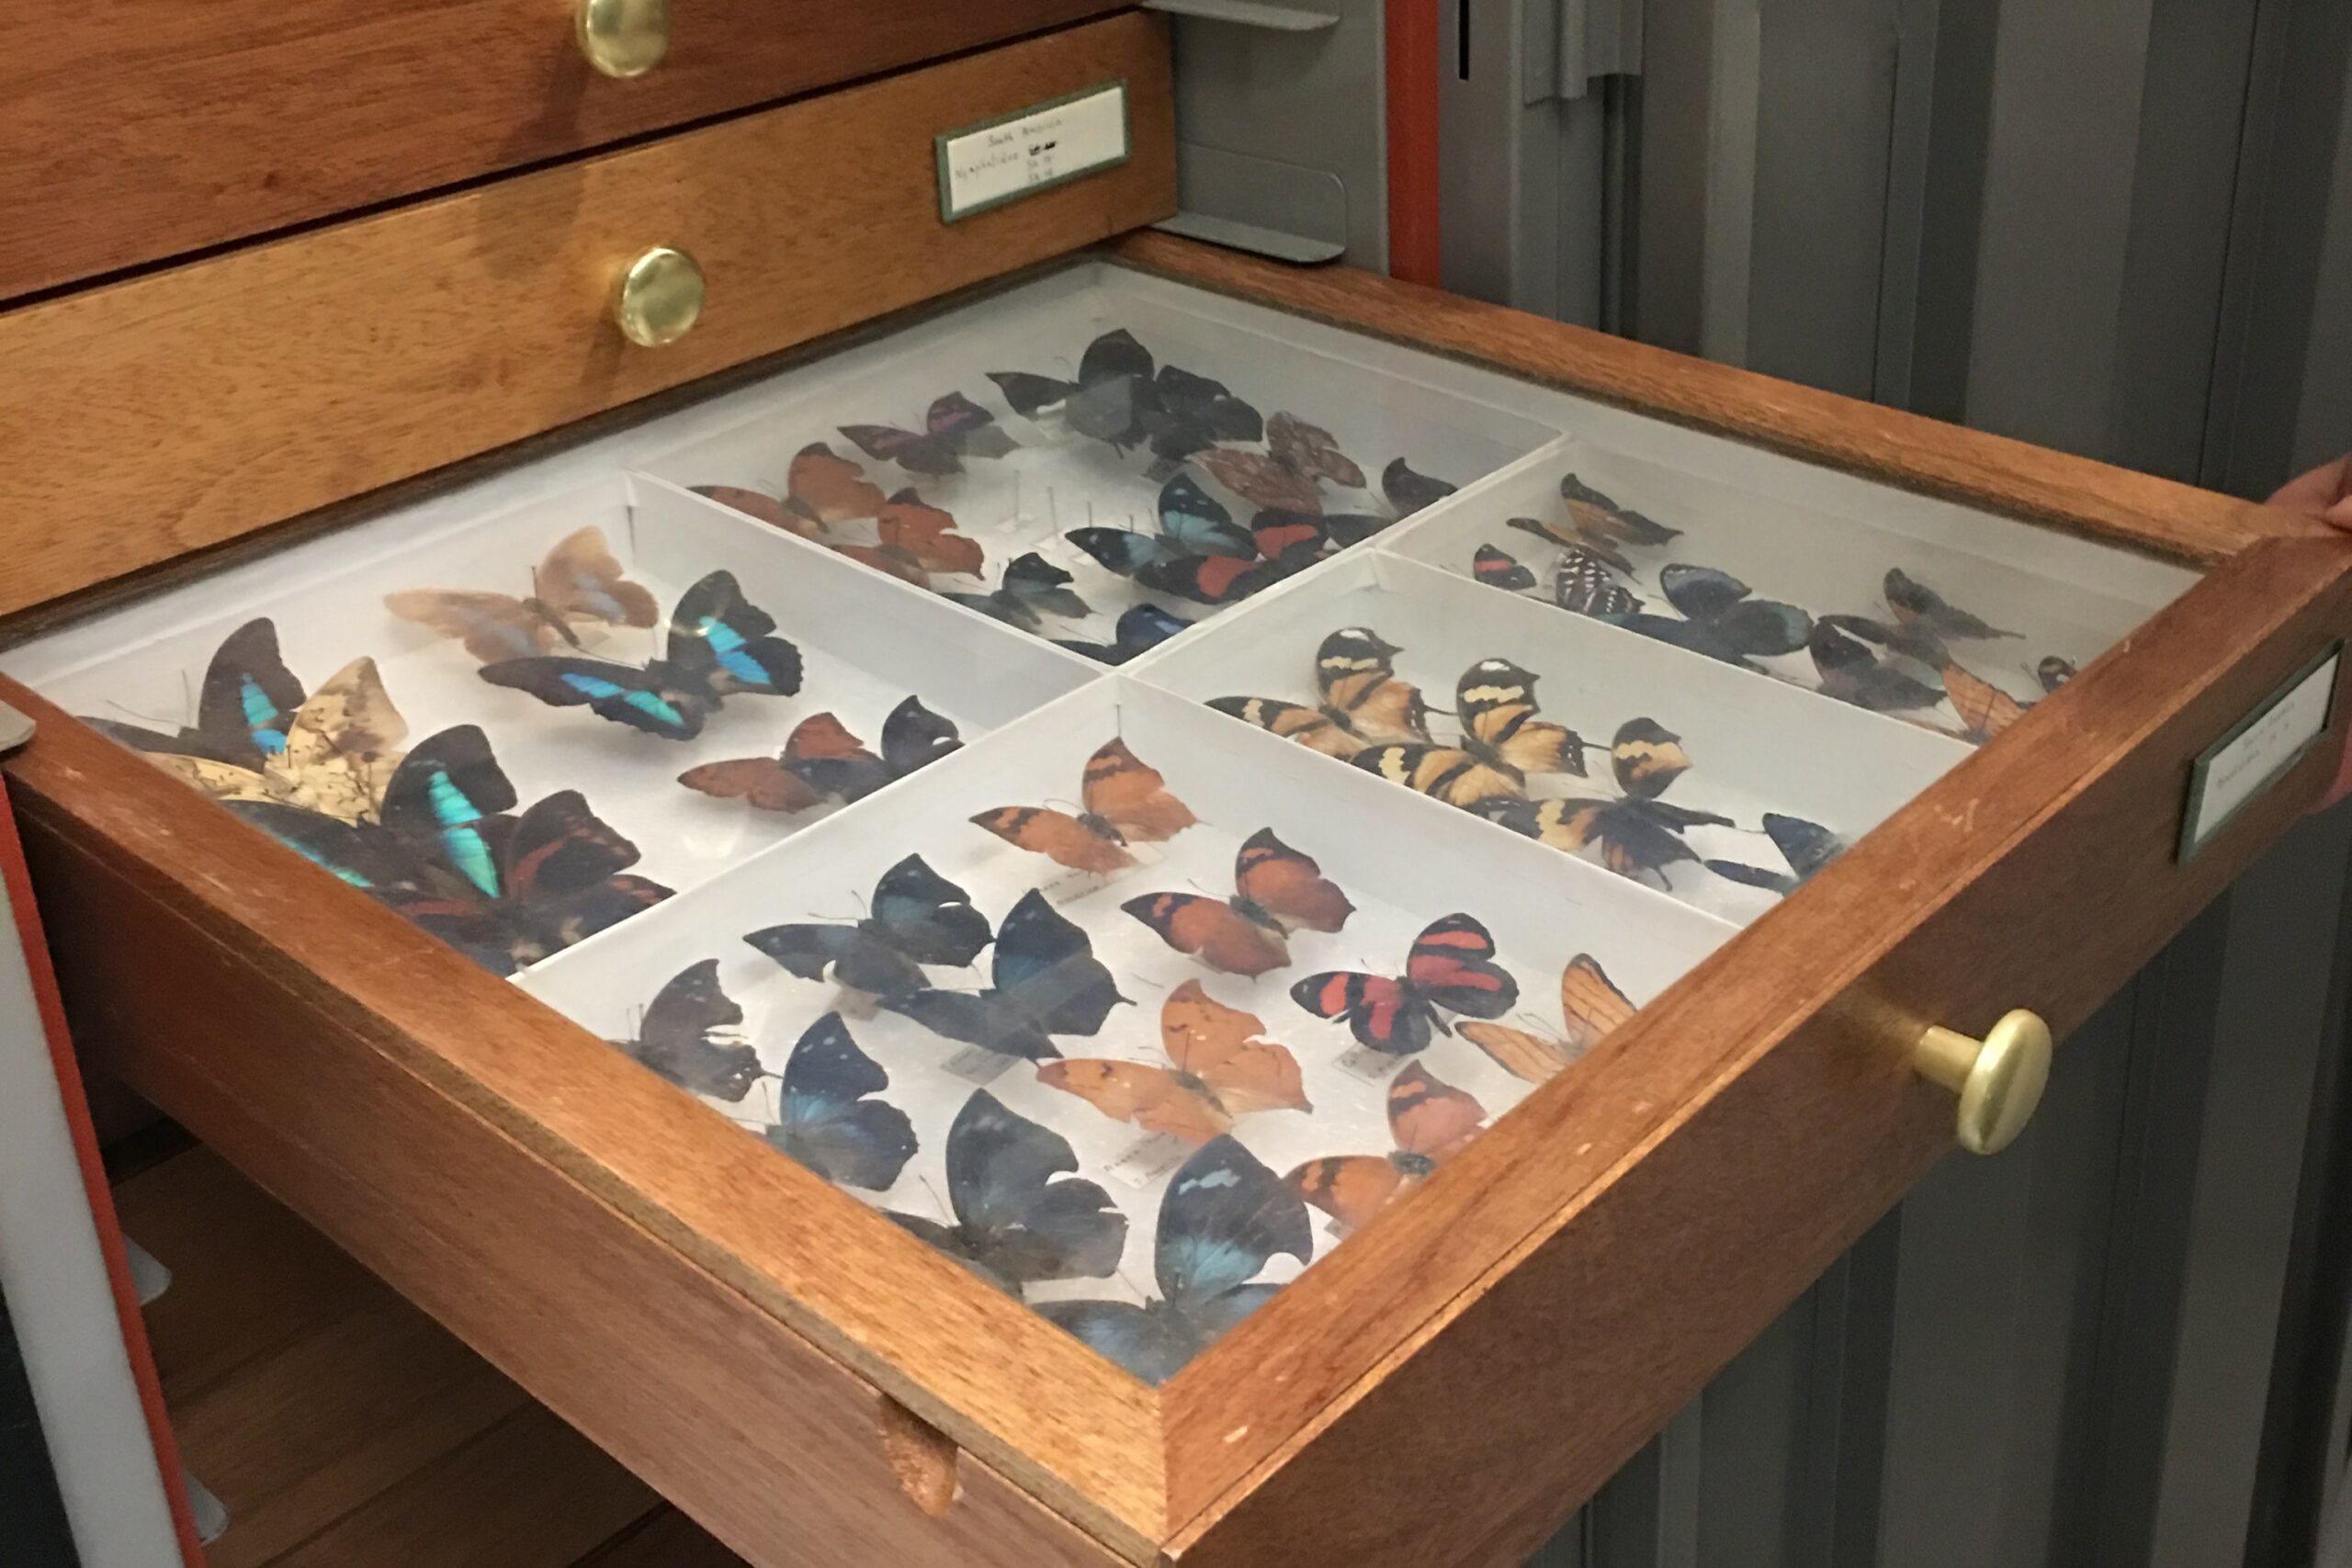 An open storage drawer containing dozens of colourful, carefully preserved butterfly specimens.